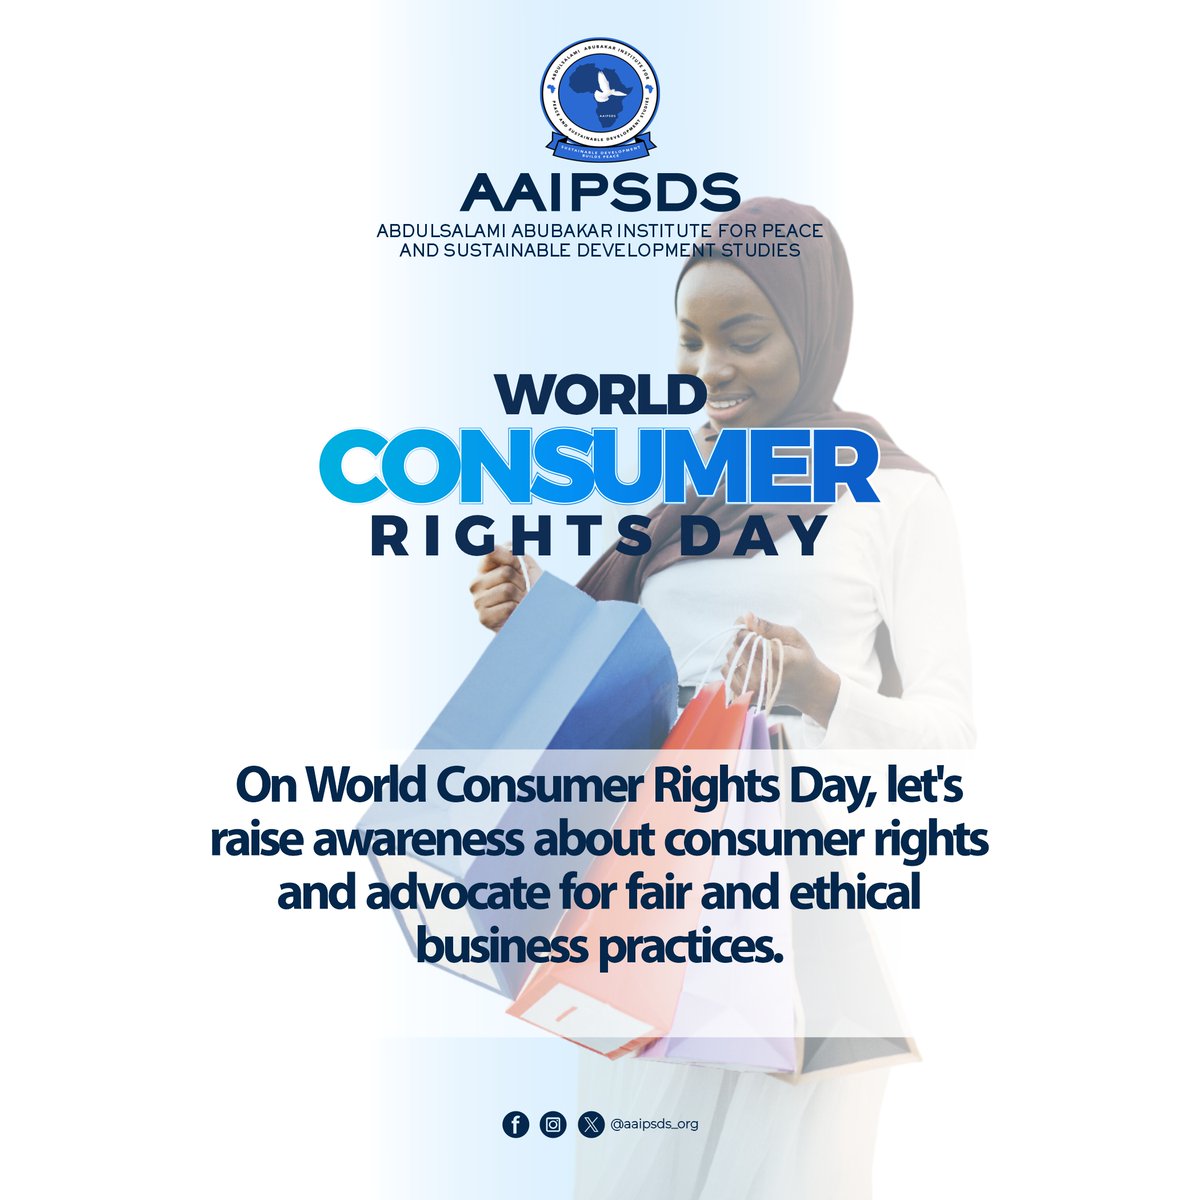 On World Consumer Rights Day, let's raise awareness about consumer rights and advocate for fair and ethical business practices.

#aaipsds #ConsumerRights #EthicalBusiness